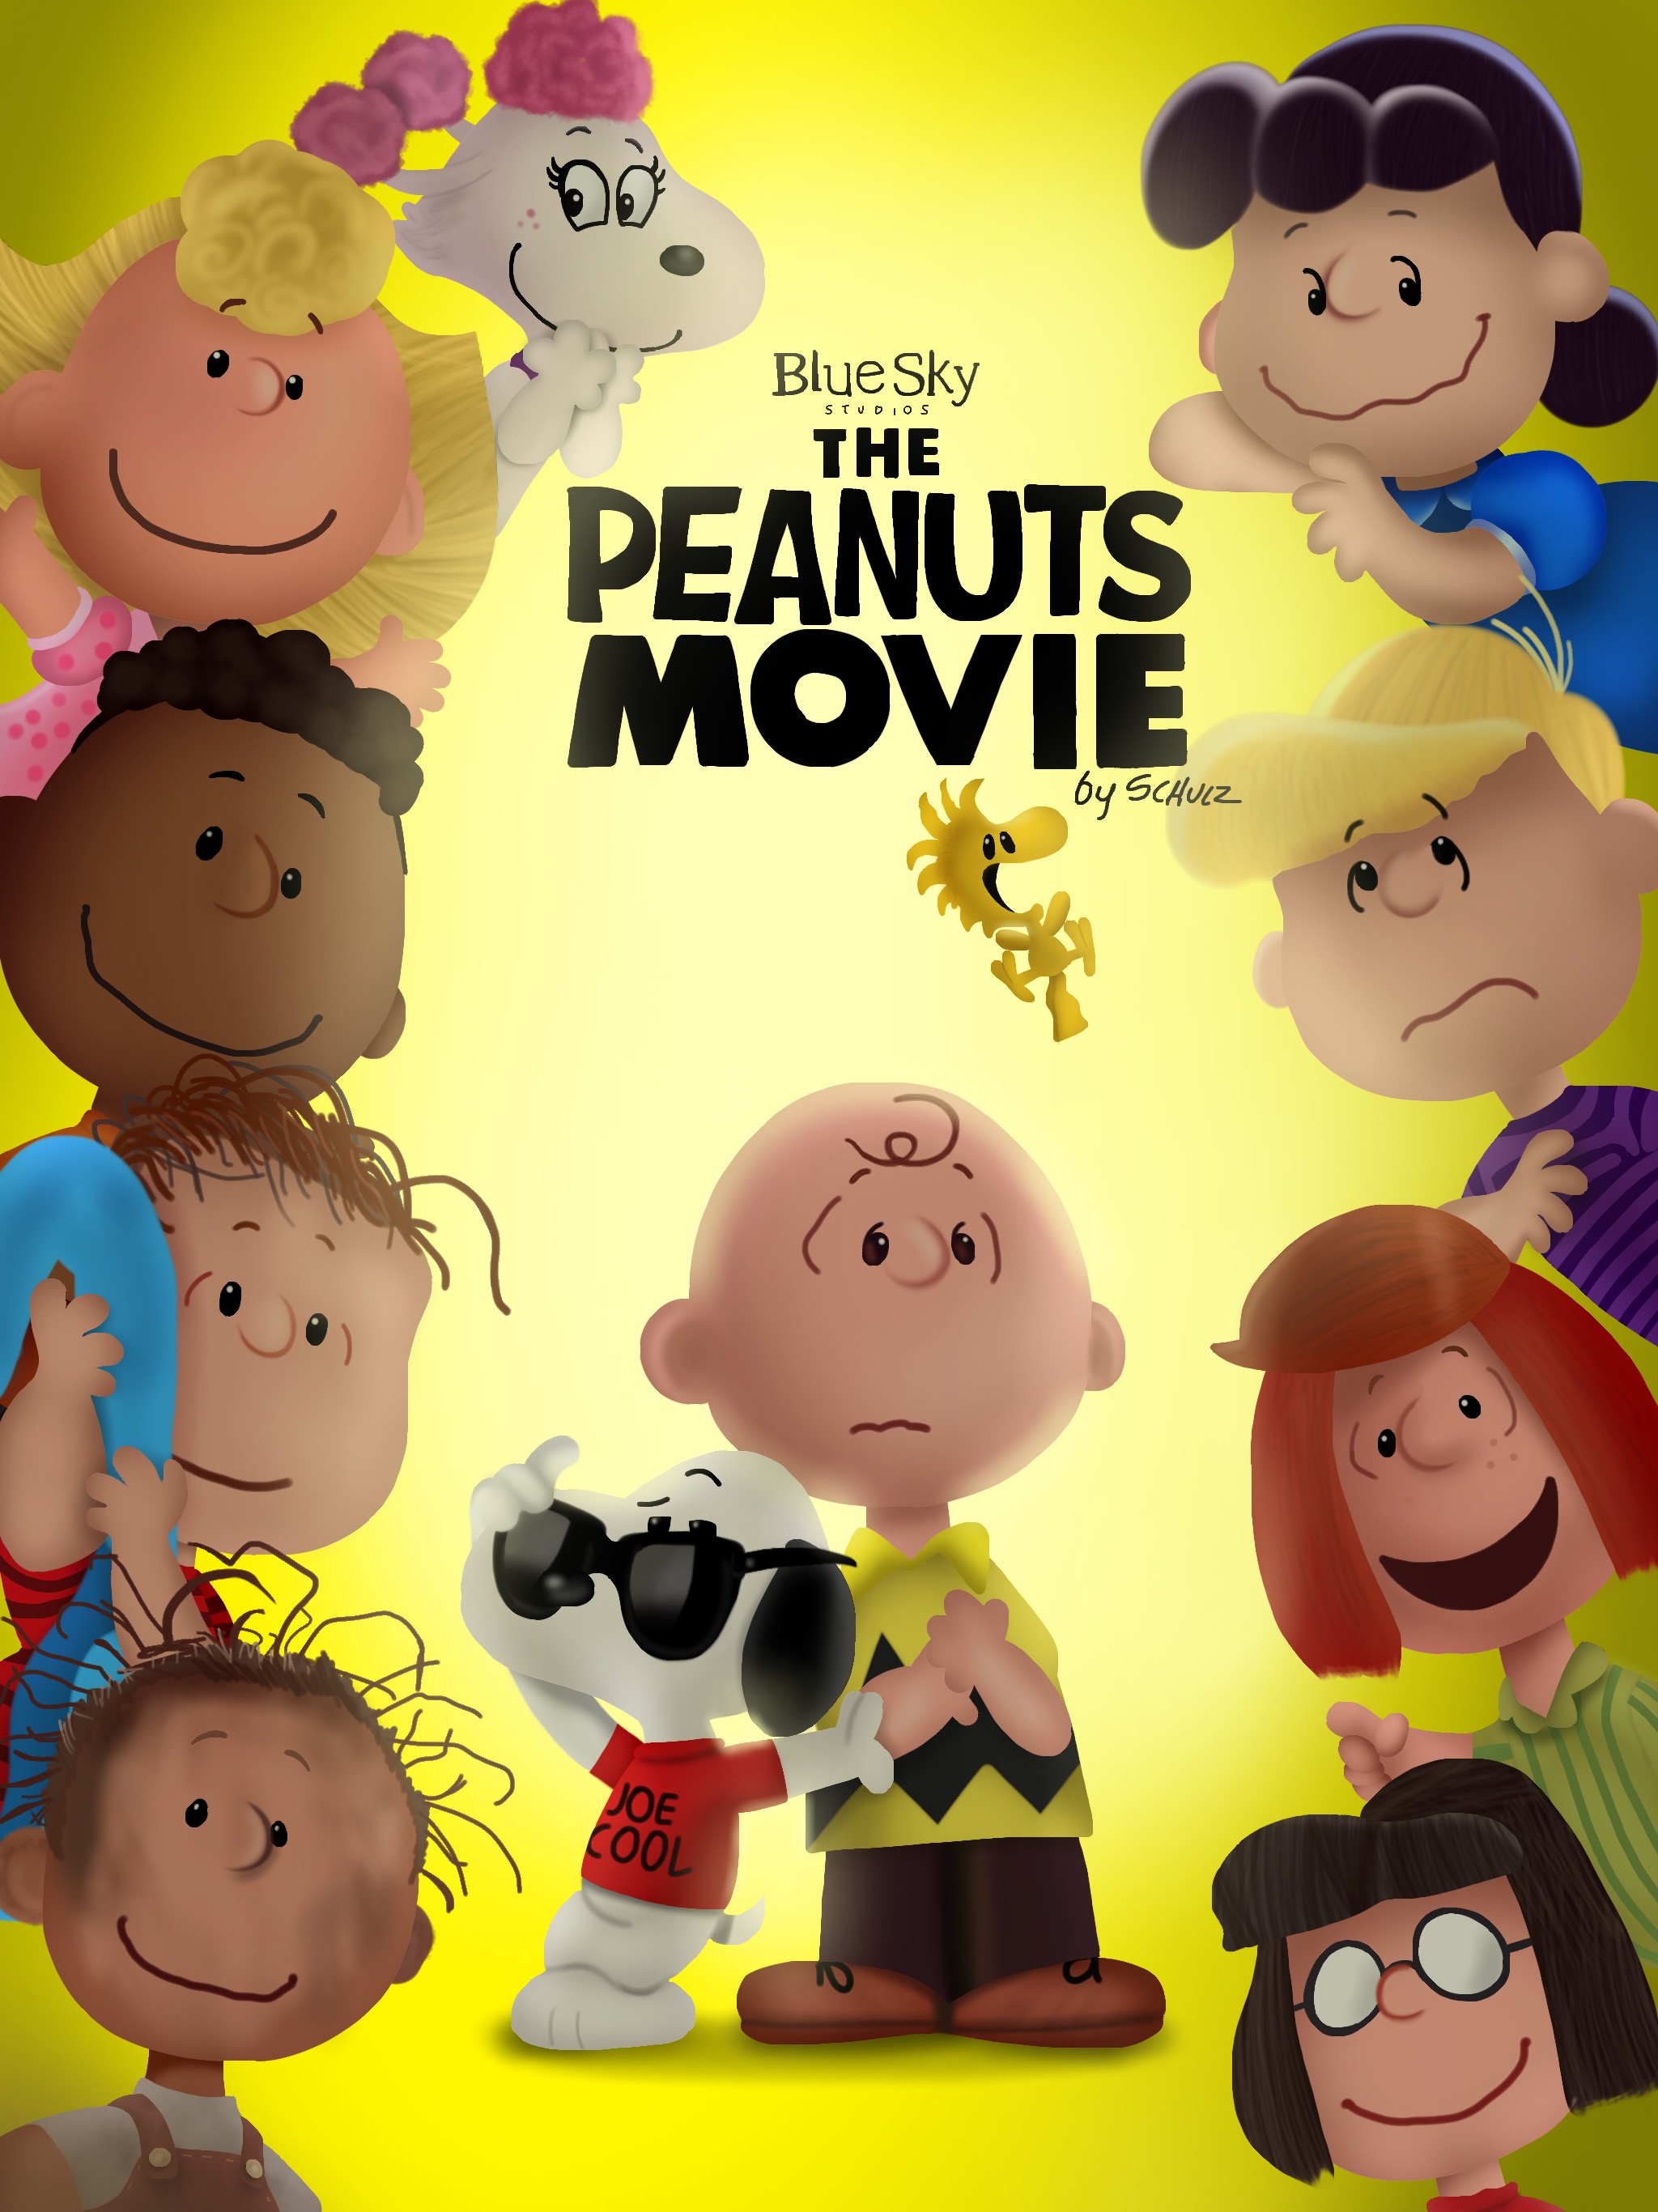 The Peanuts Movie (Fan Made Poster) by JustSomePainter11 on DeviantArt2048 x 2732